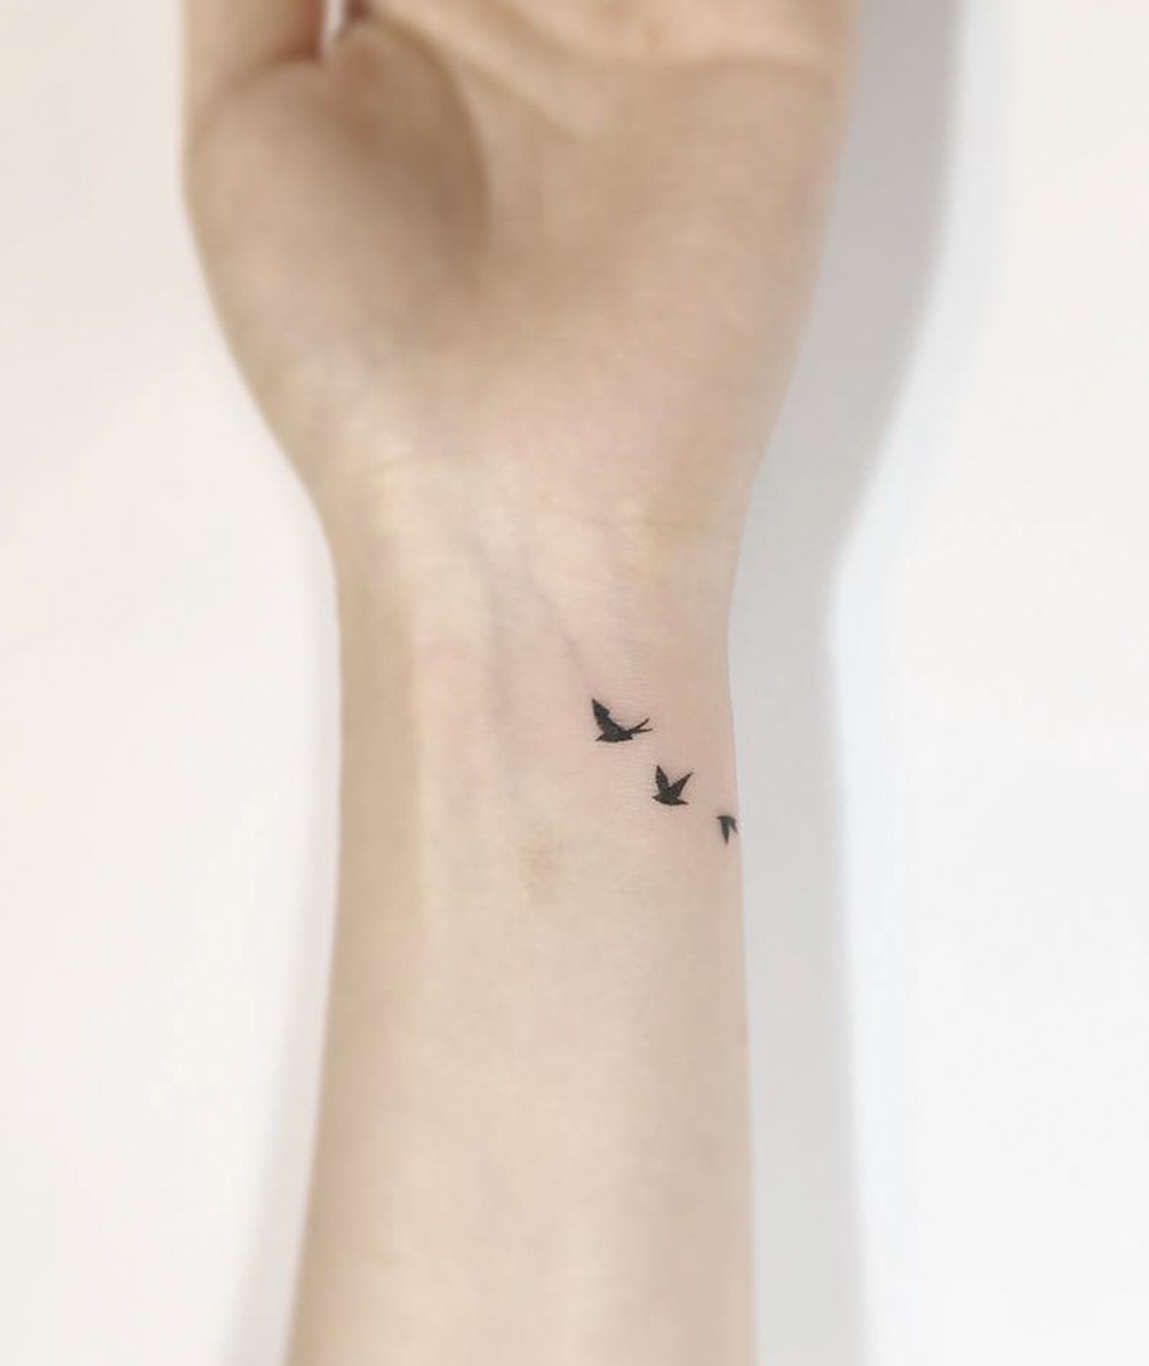 Birds Wrist Tatoo Tattoos Tattoos Wrist Tattoos Bird Tattoo Wrist intended for size 1149 X 1366